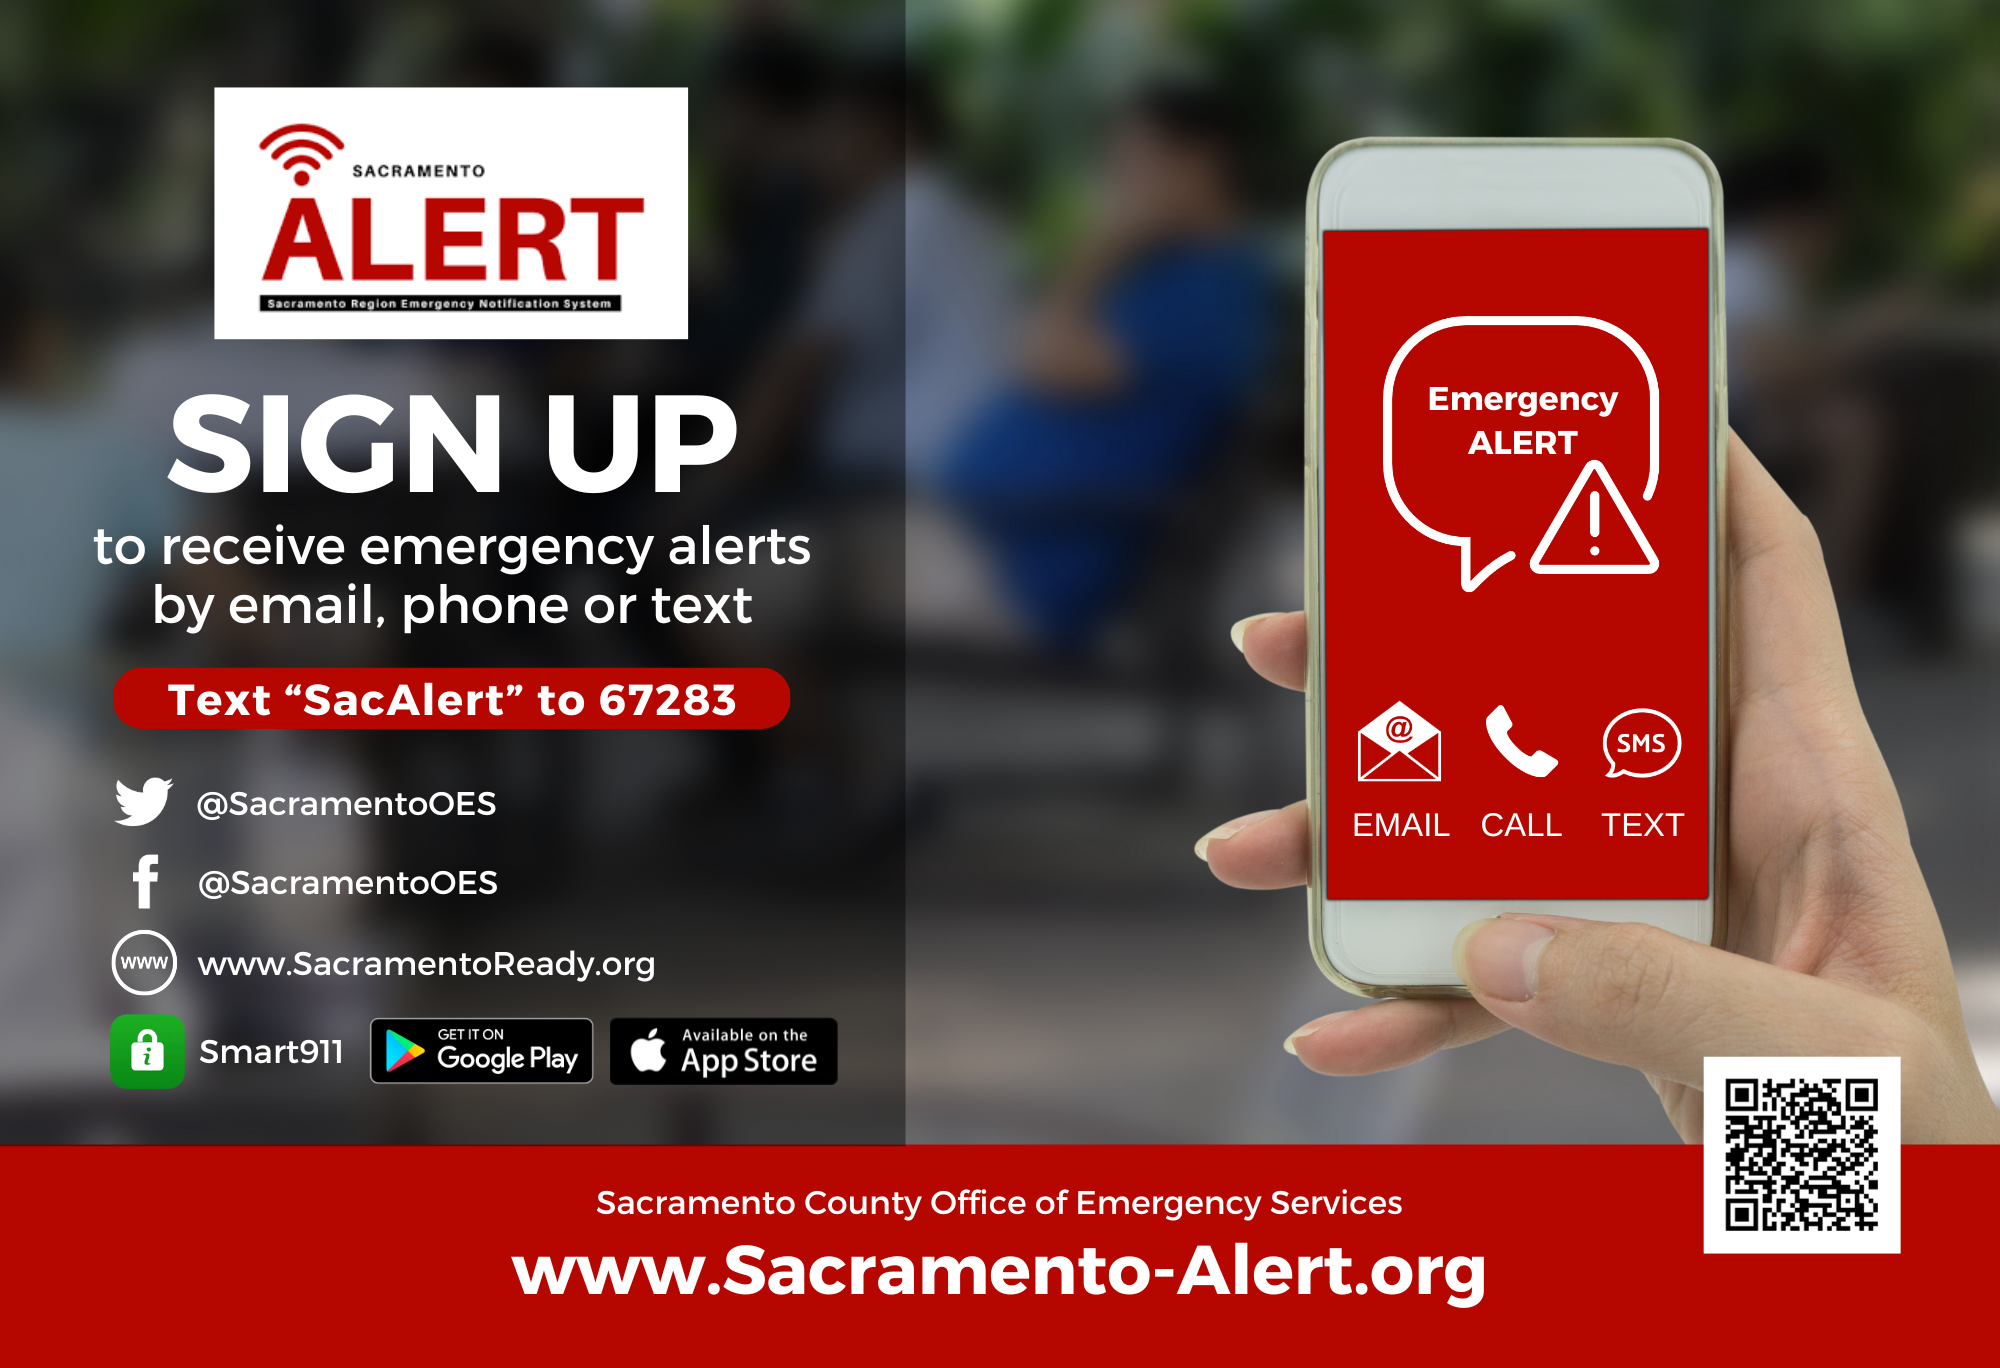 Sacramento Alerts. Sign Up to receive emergency alerts by email, phone or text. https://www.Sacramento-Alert.org. Sacrmento County Office of Emergency Services. 